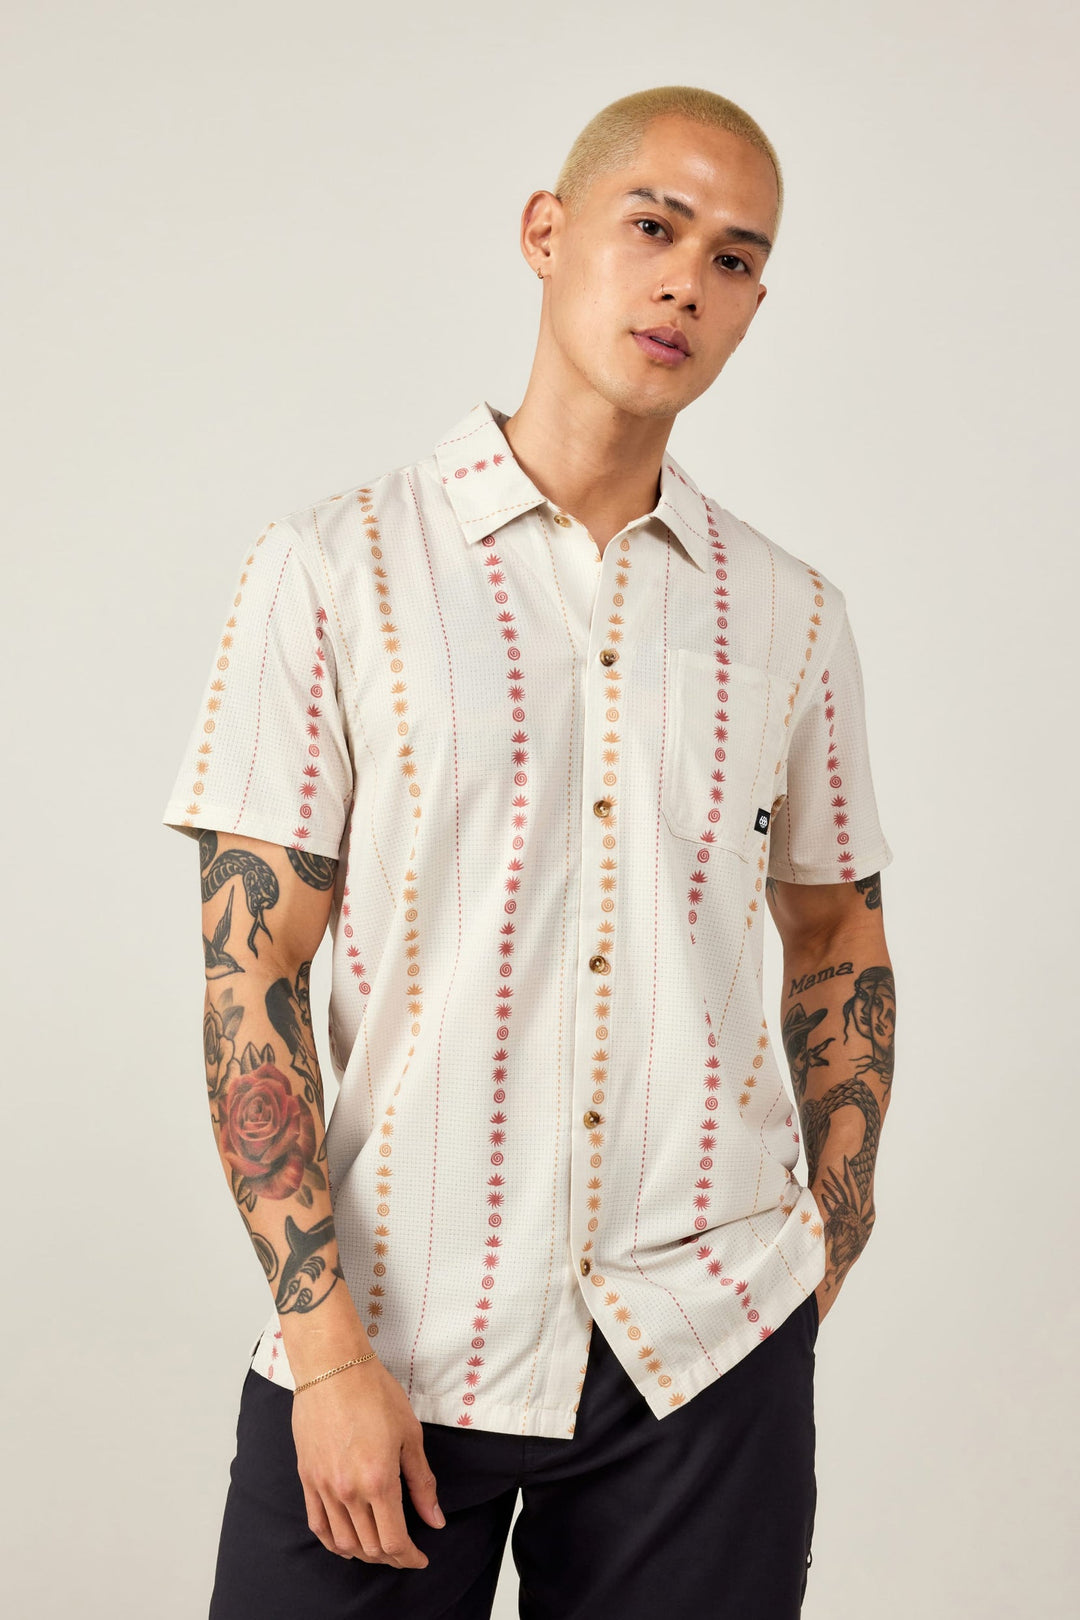 686 
Nomad Perforated Button Down Shirt - Southwest Limestone - Sun Diego Boardshop